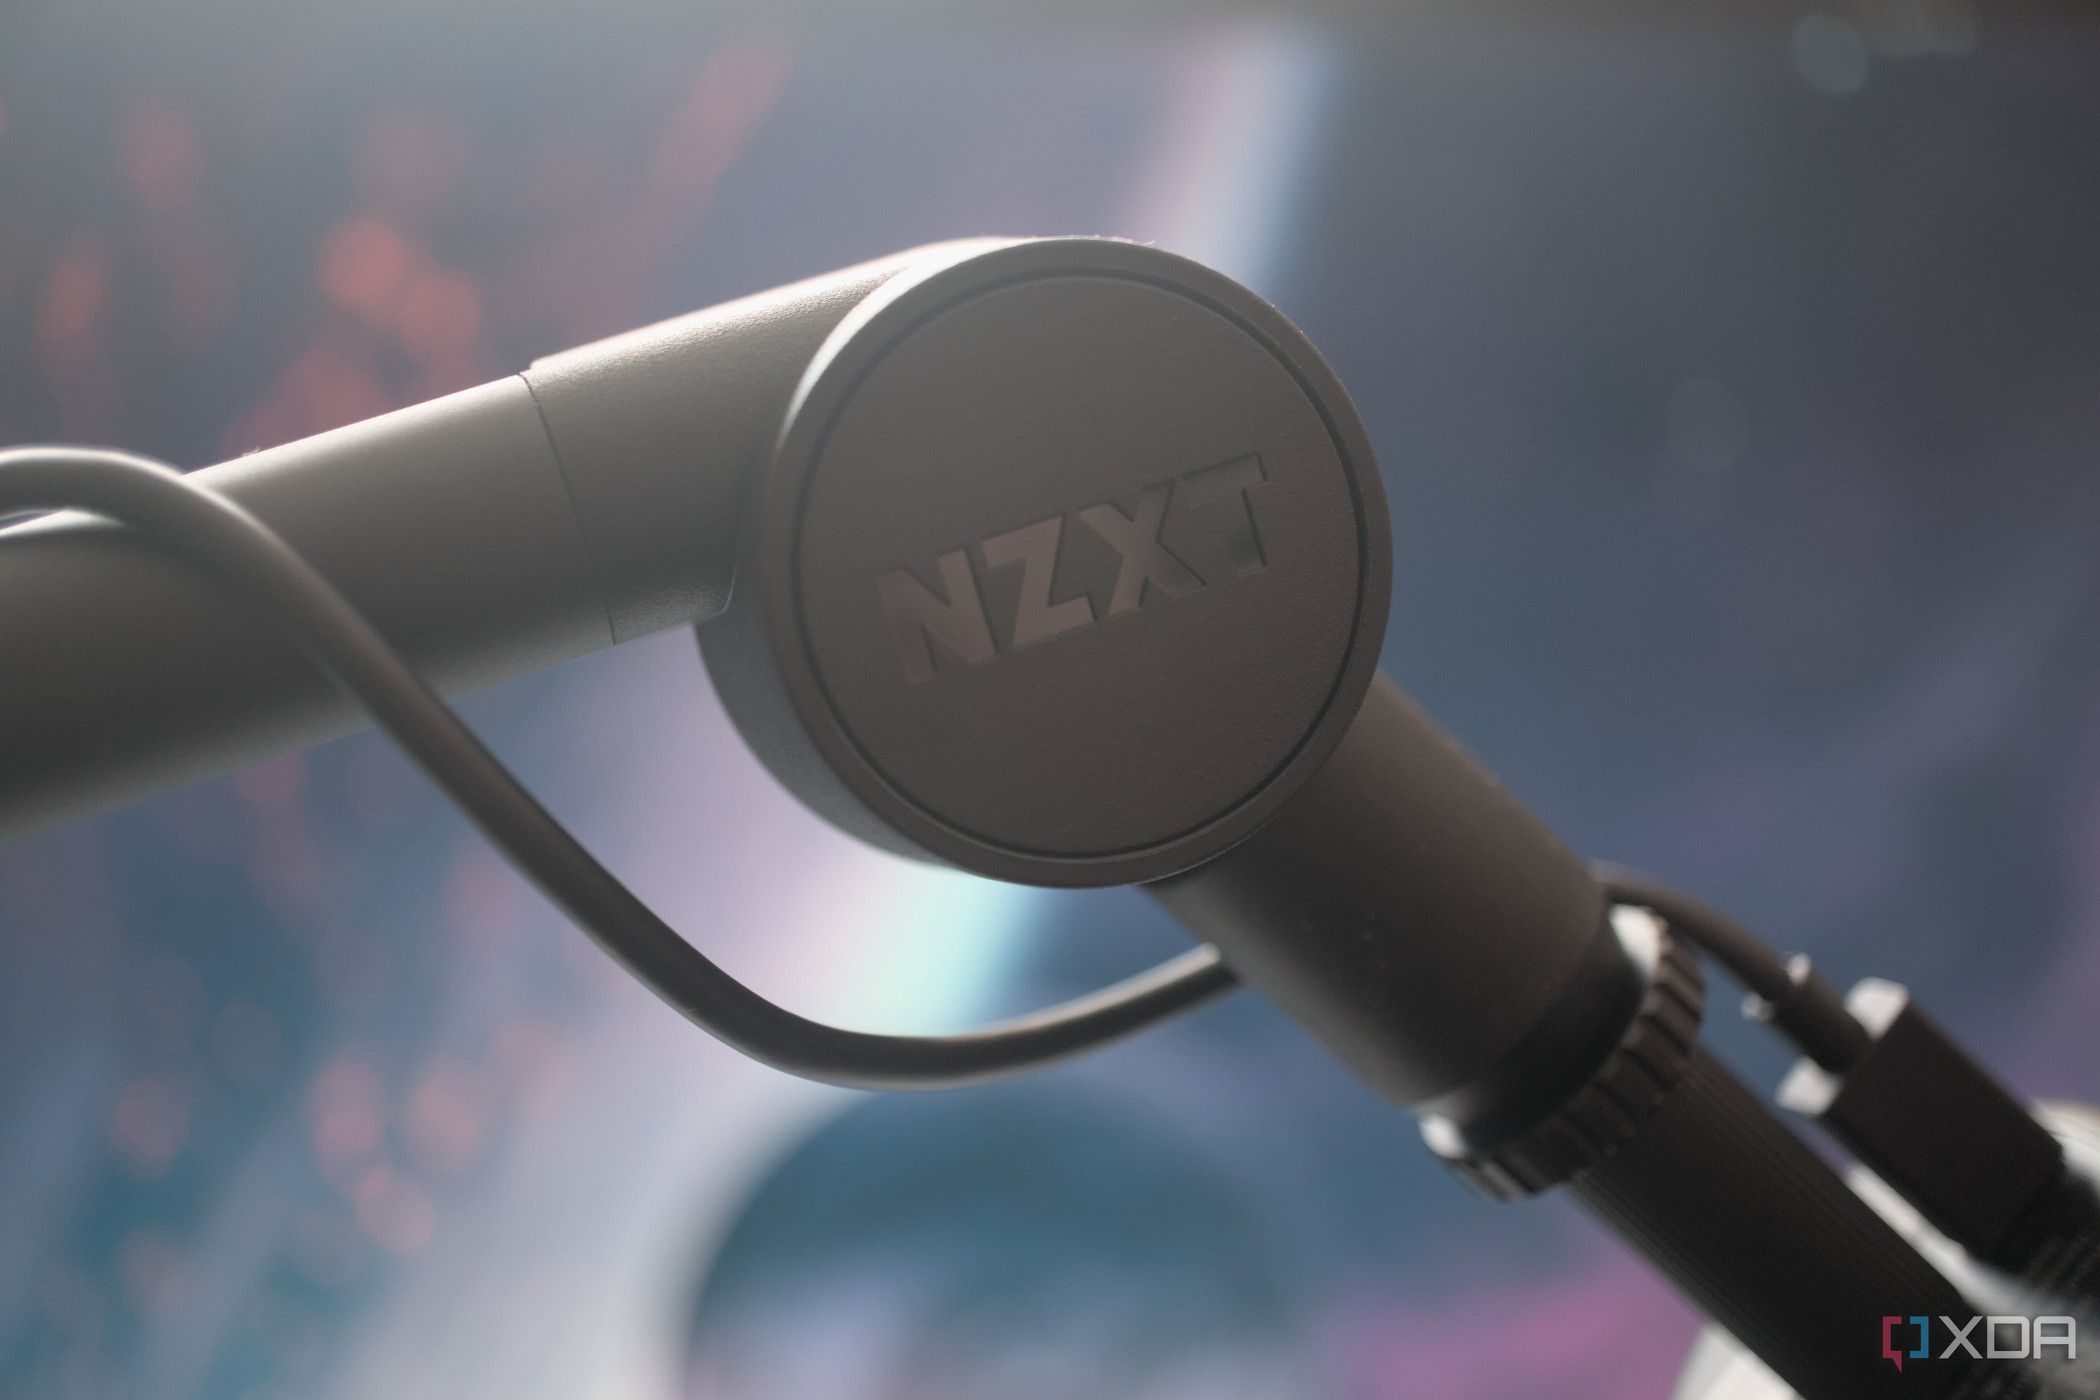 NZXT is a small capsule